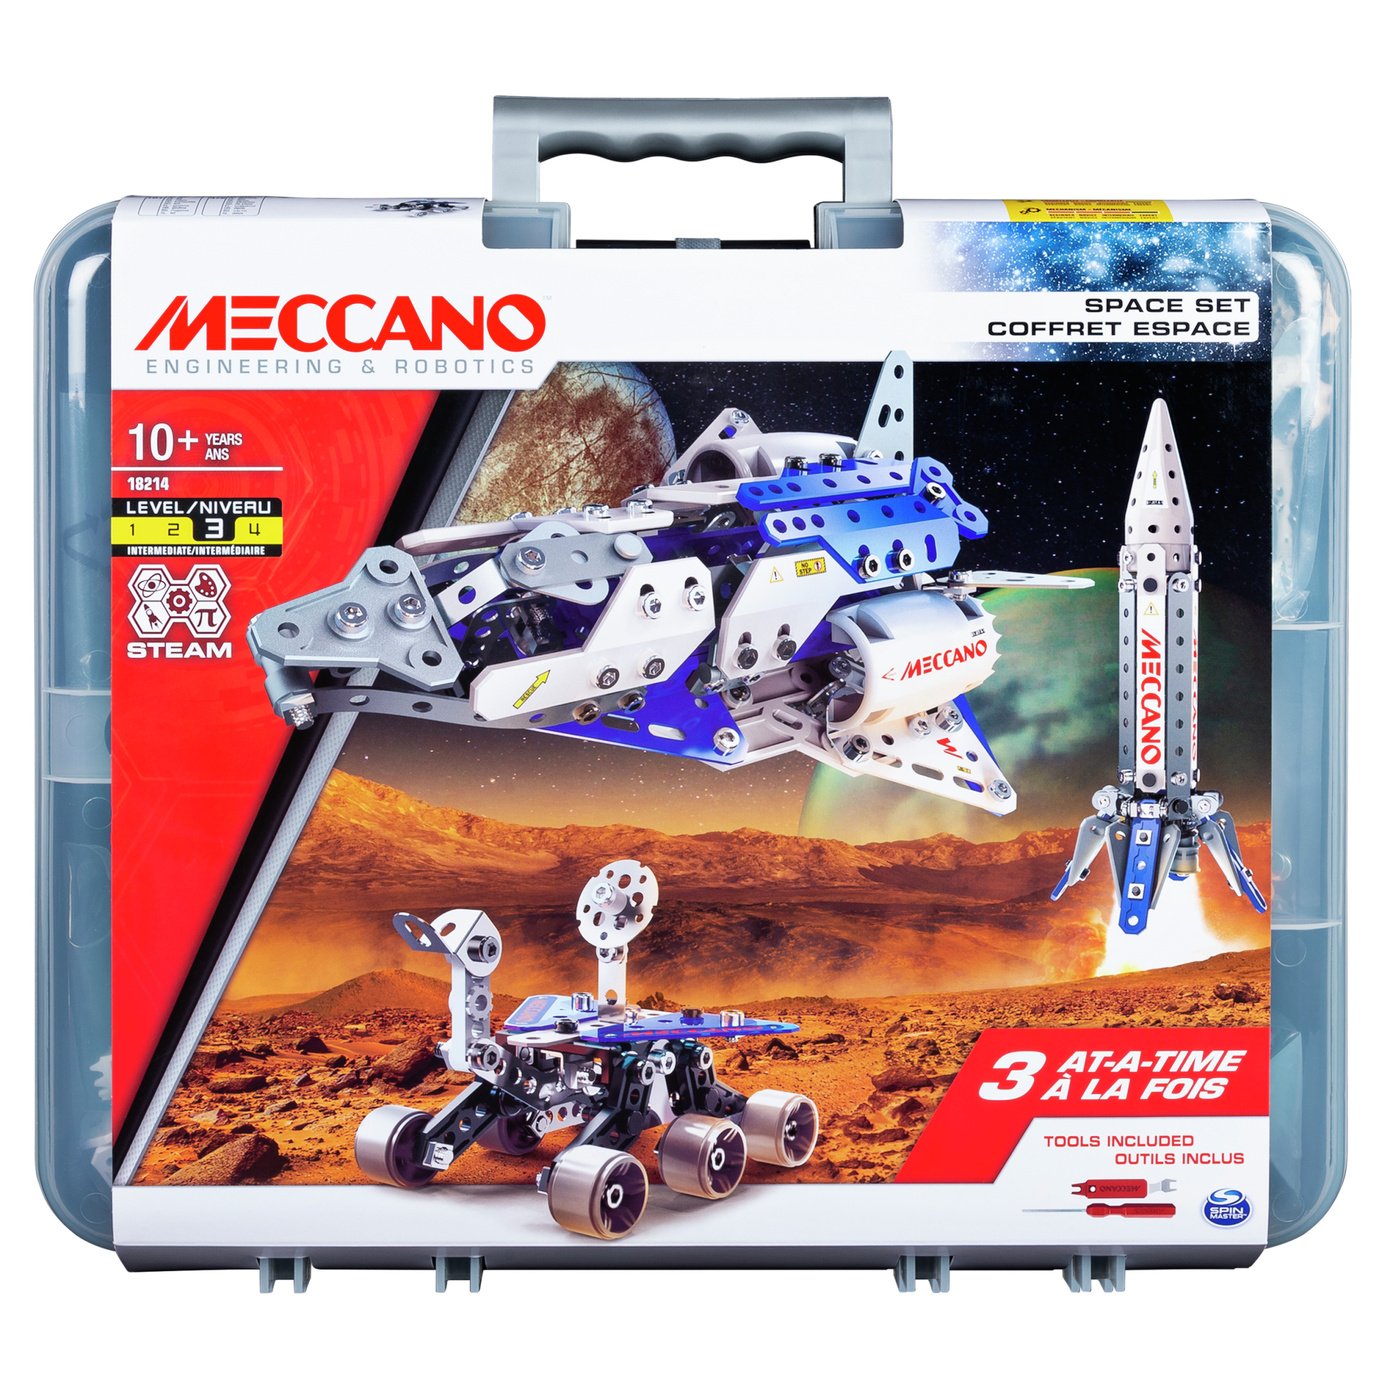 Meccano Space Model Set Review